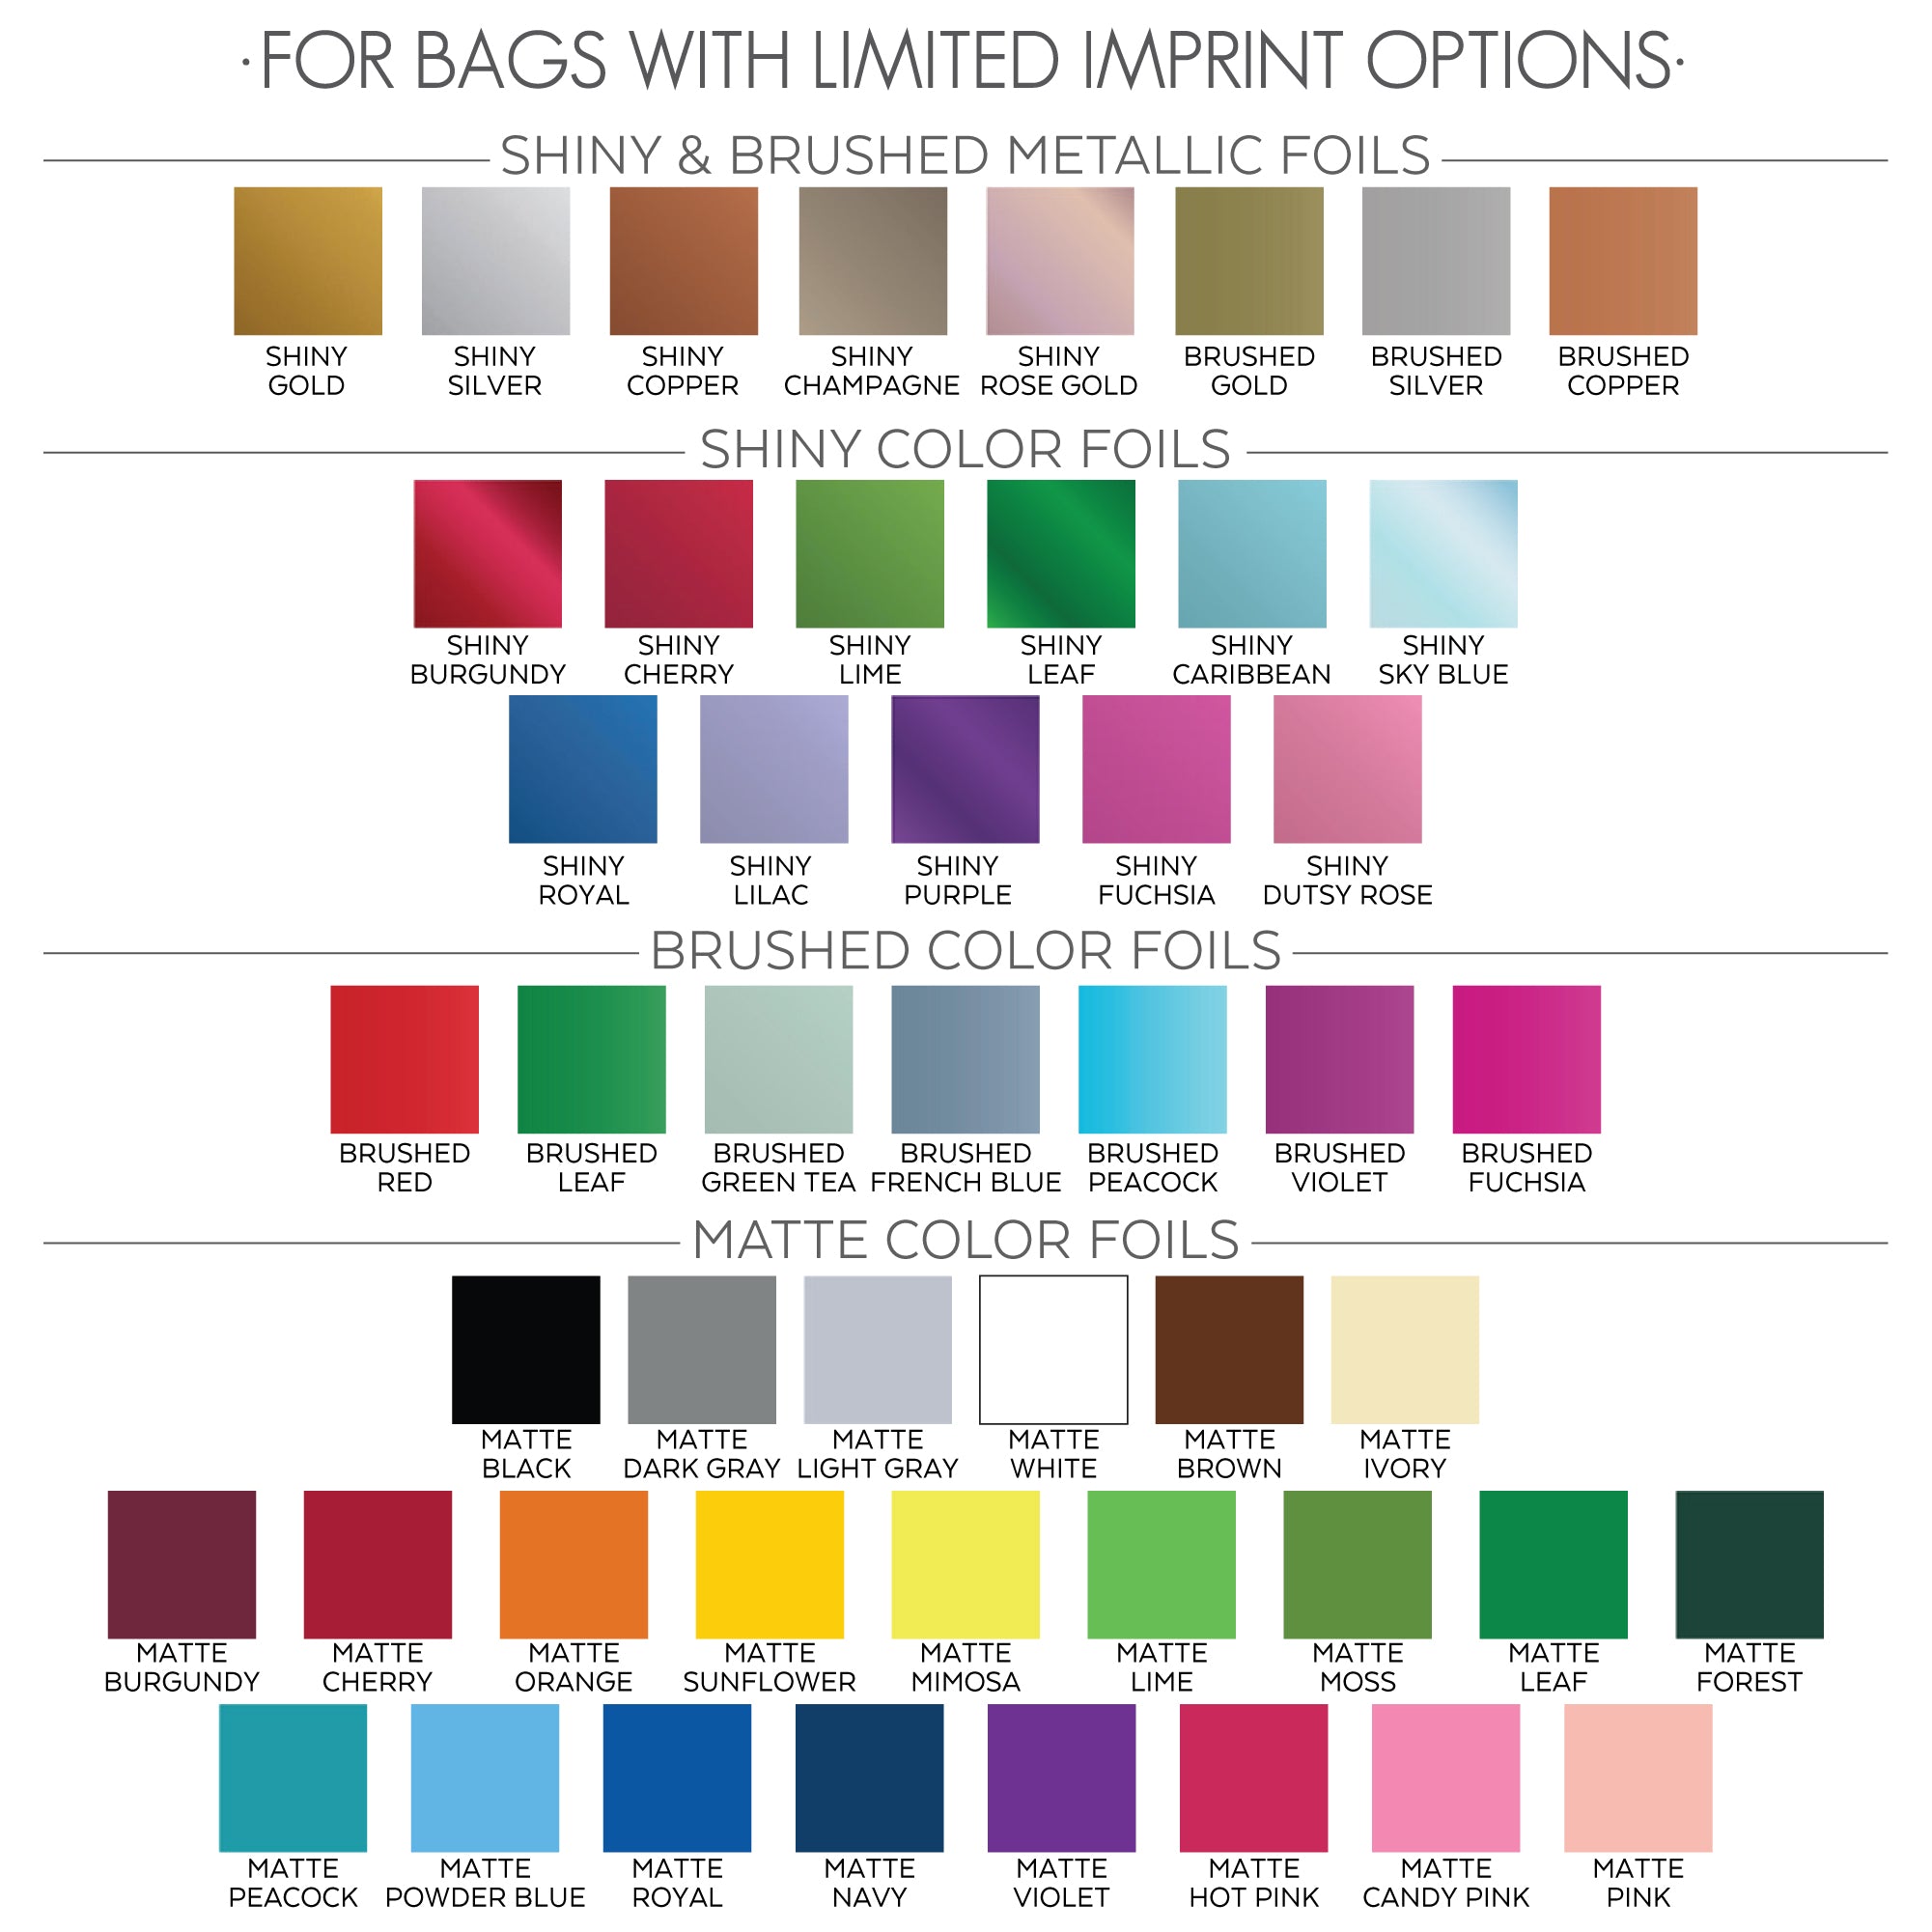 LIMITED XX FOIL OPTIONS EUROTOTE